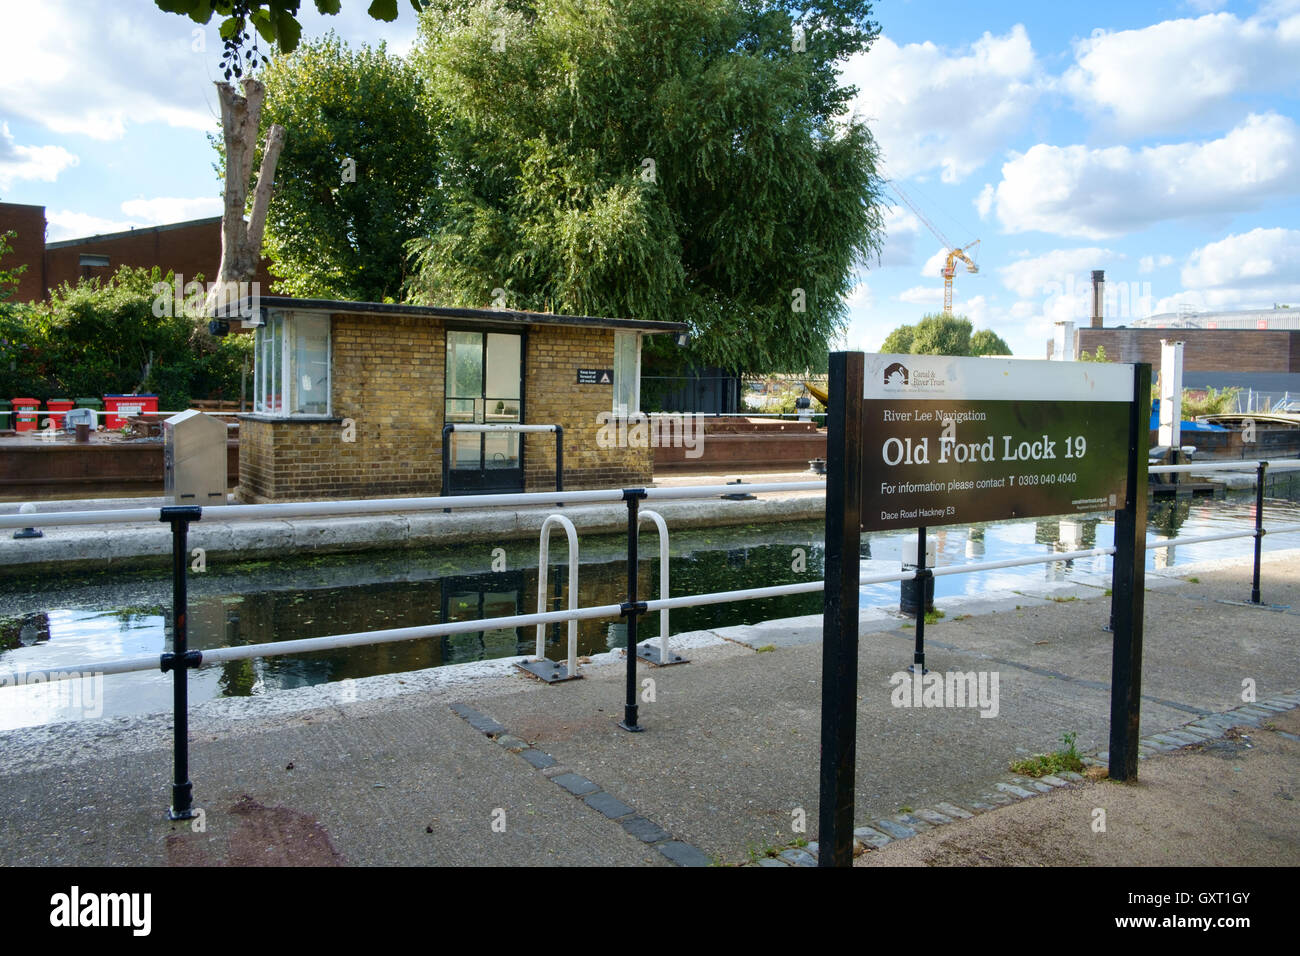 The historic Lock 19 on the River Lea Navigation canal at Old Ford Stock Photo